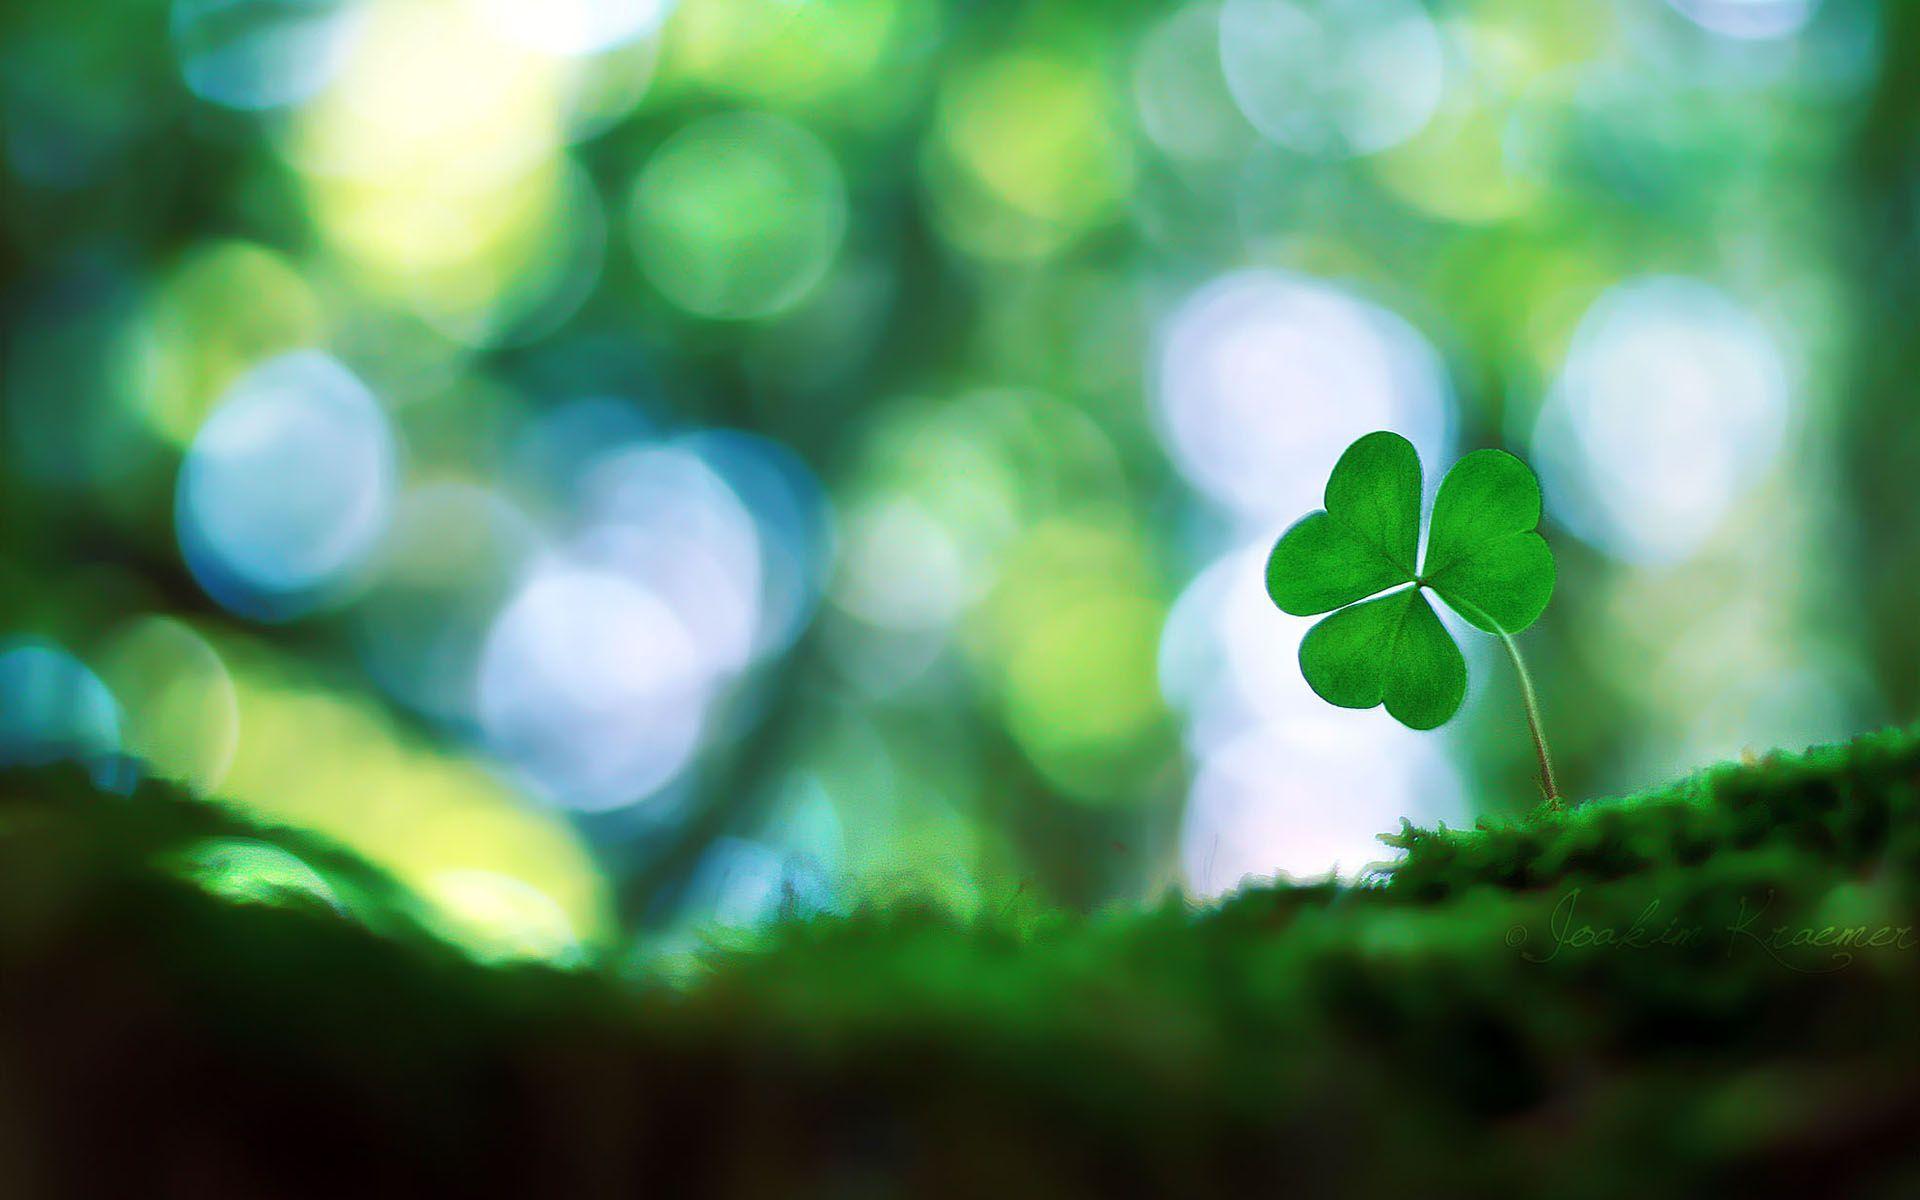 Four Leaf Clover Background Image & Picture